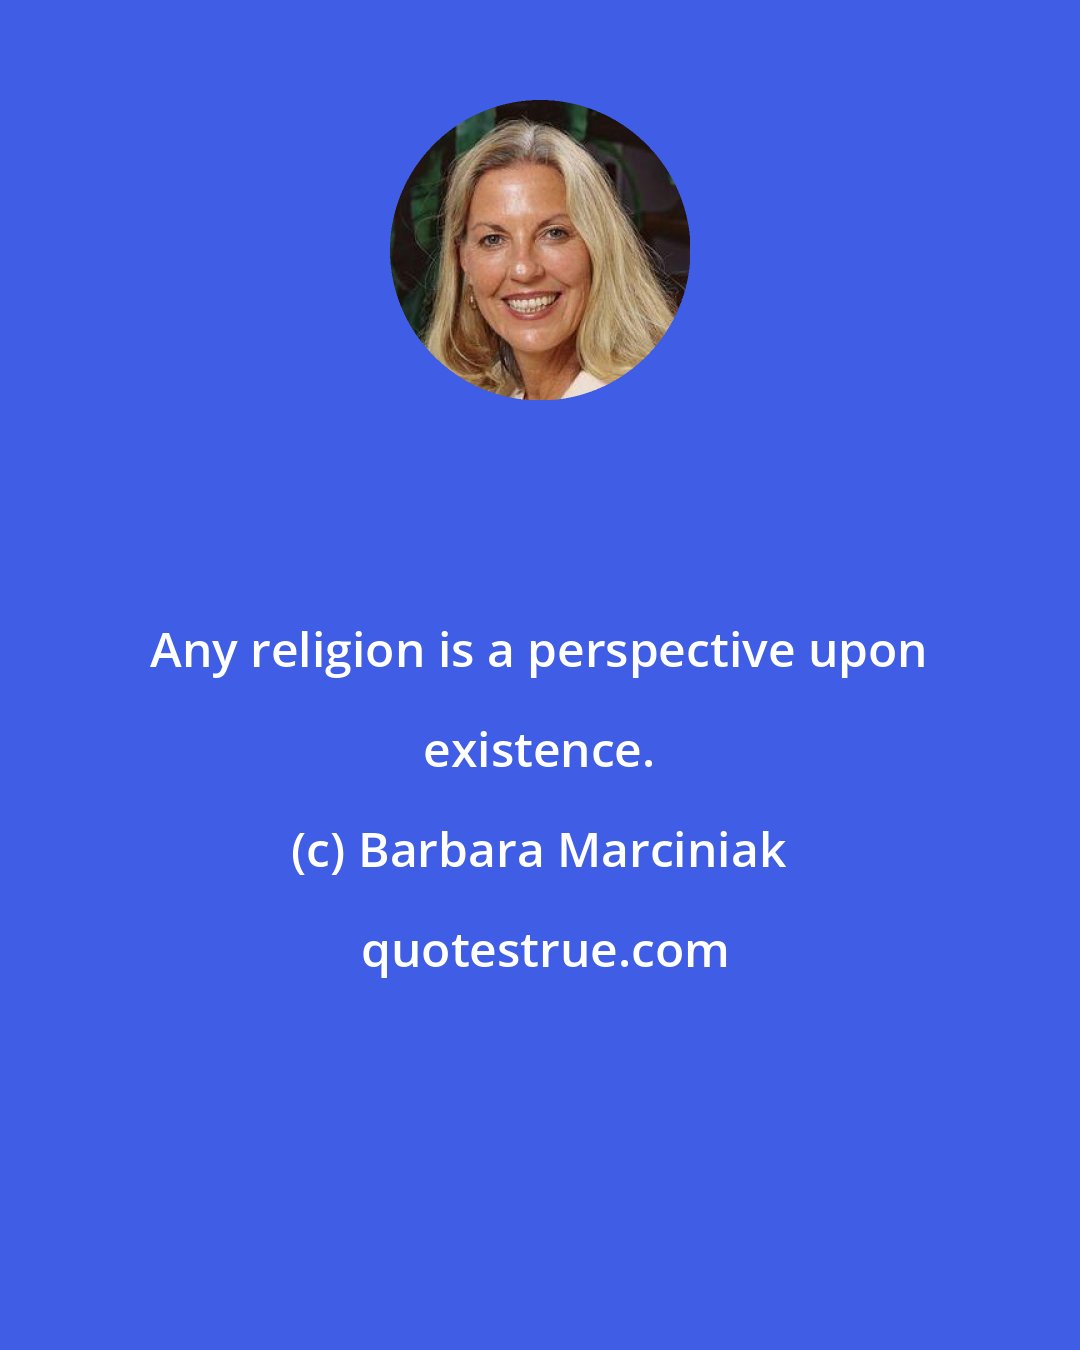 Barbara Marciniak: Any religion is a perspective upon existence.